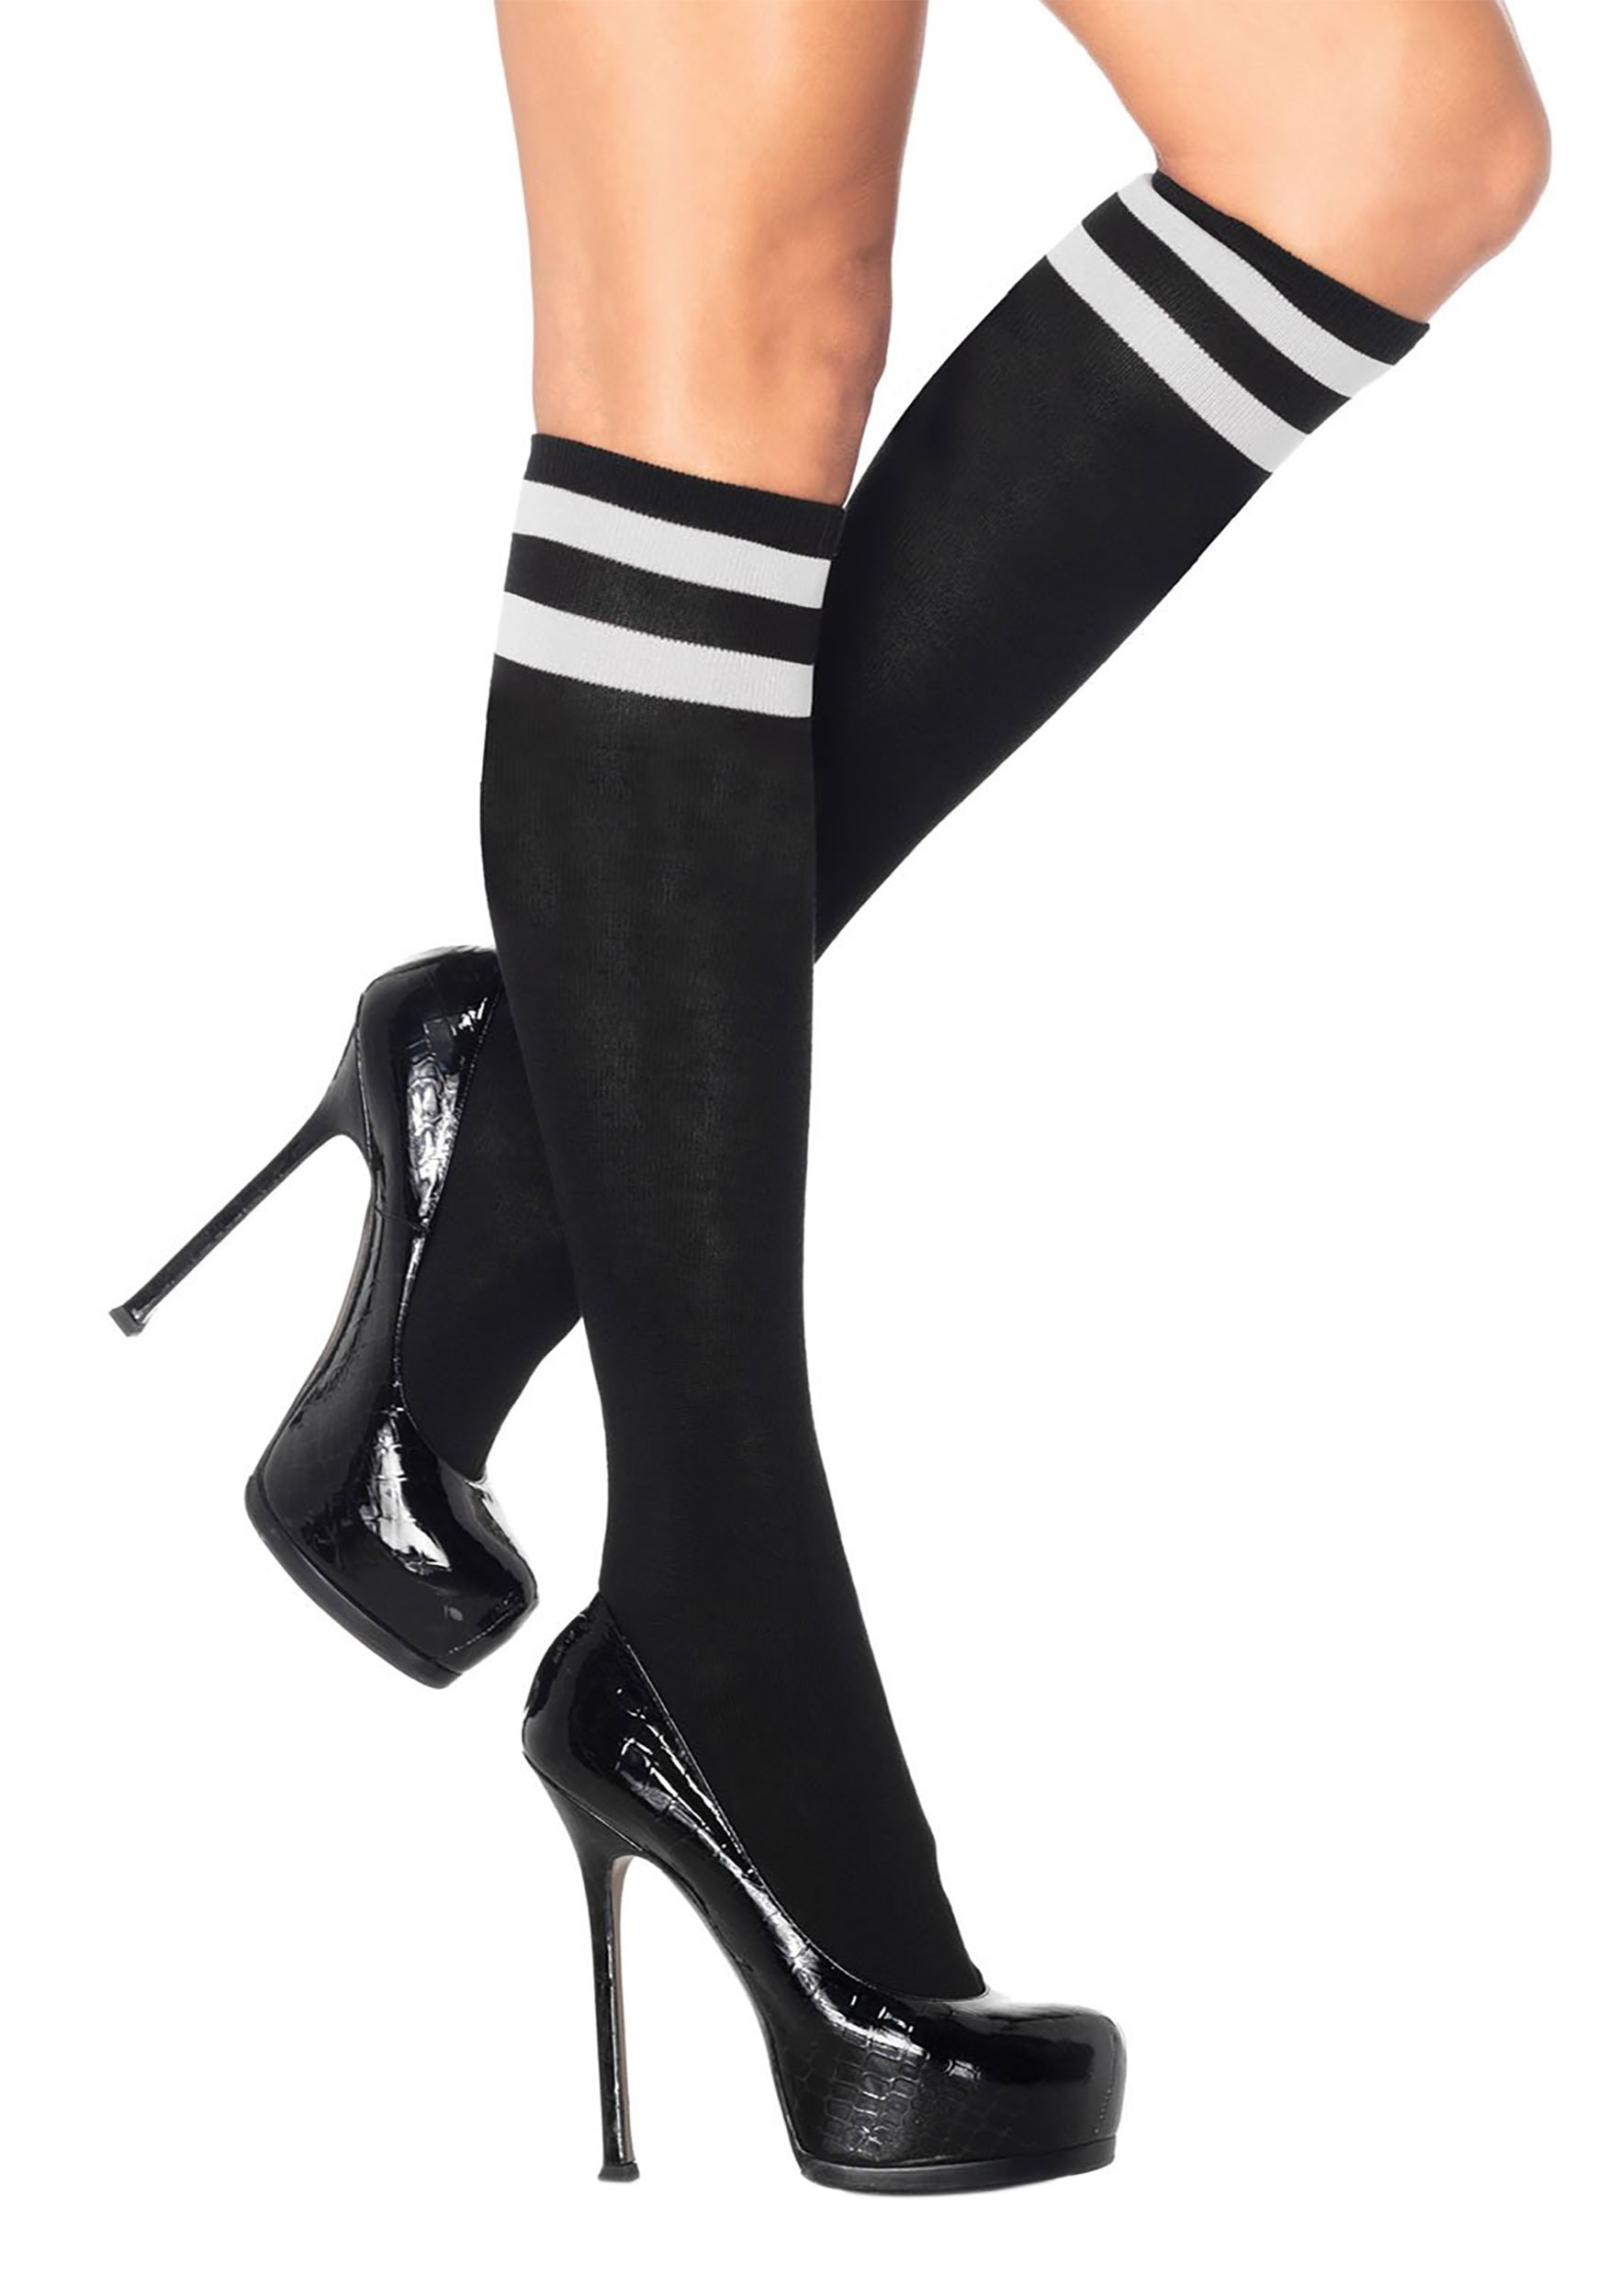 https://images.halloweencostumes.ca/products/58032/1-1/black-with-white-striped-athletic-socks.jpg